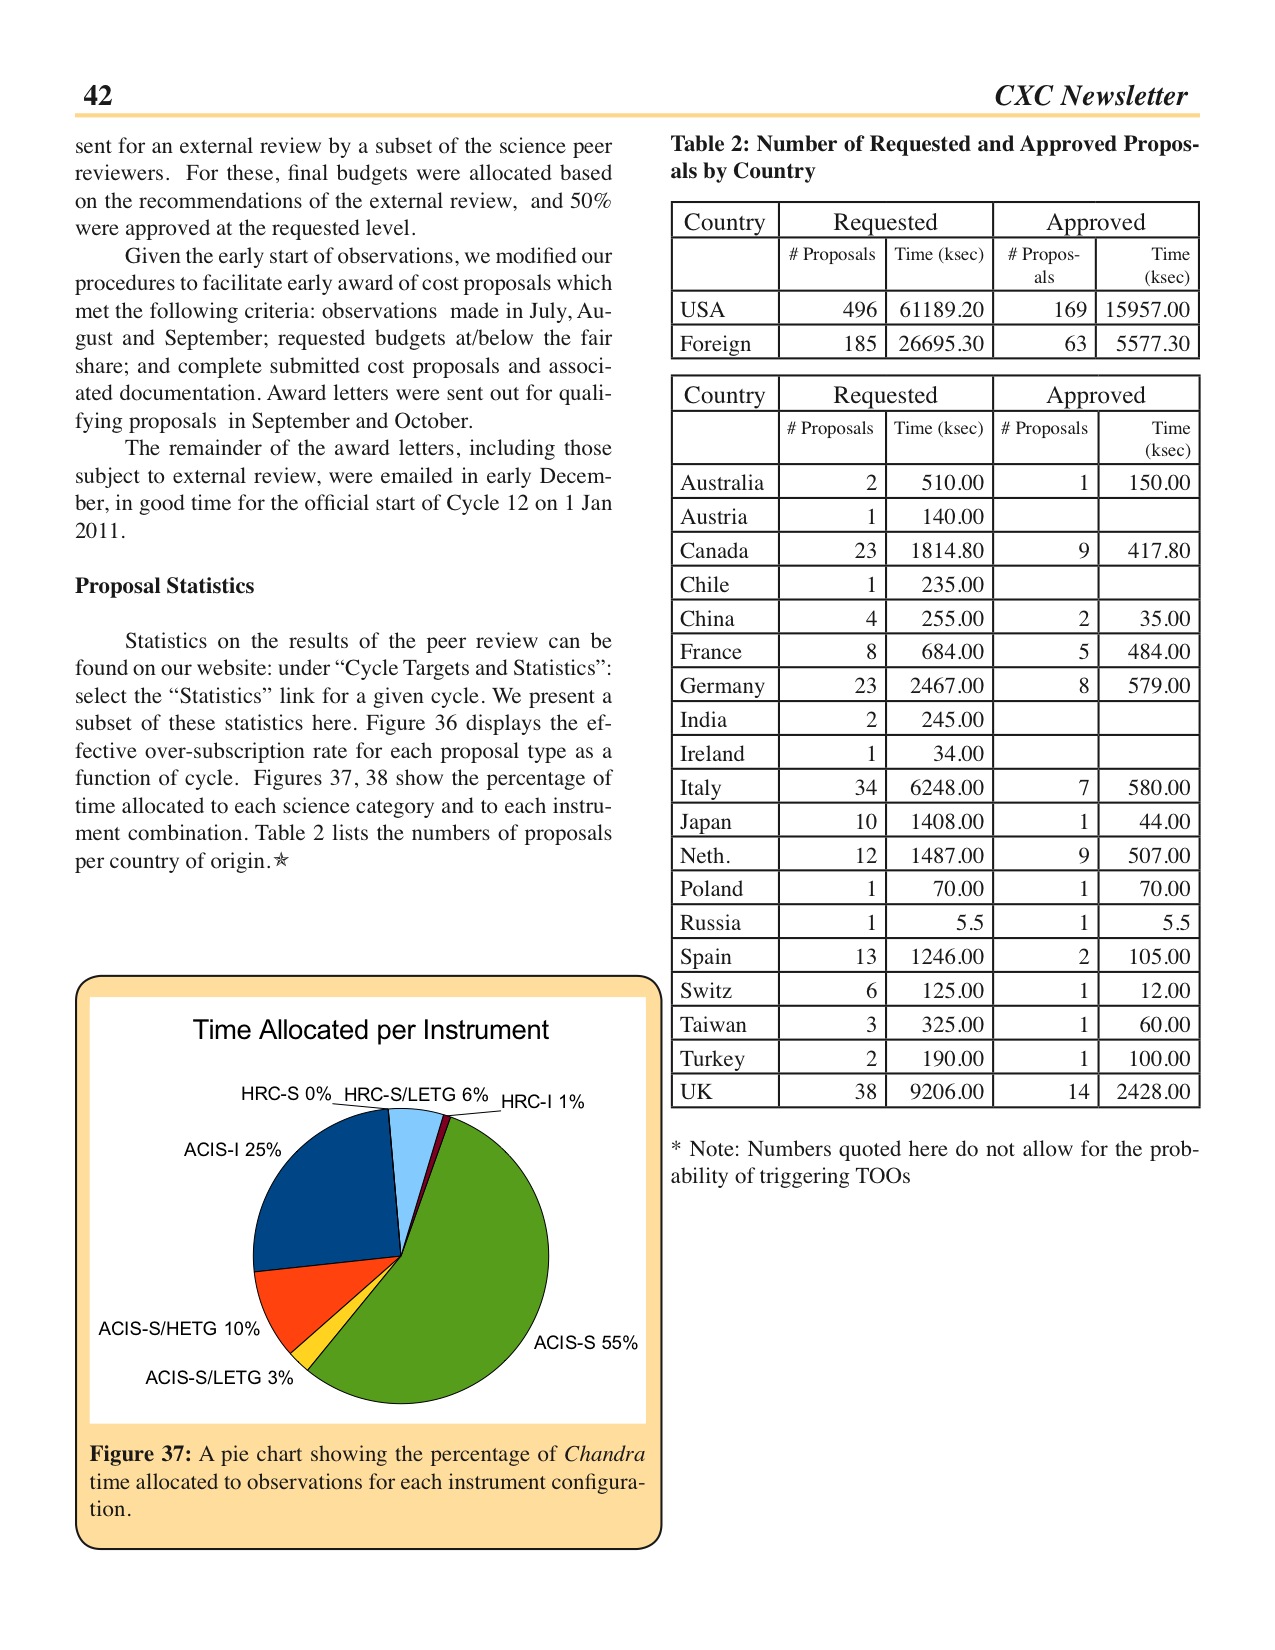 Page 42 of the Chandra Newsletter, issue 18.